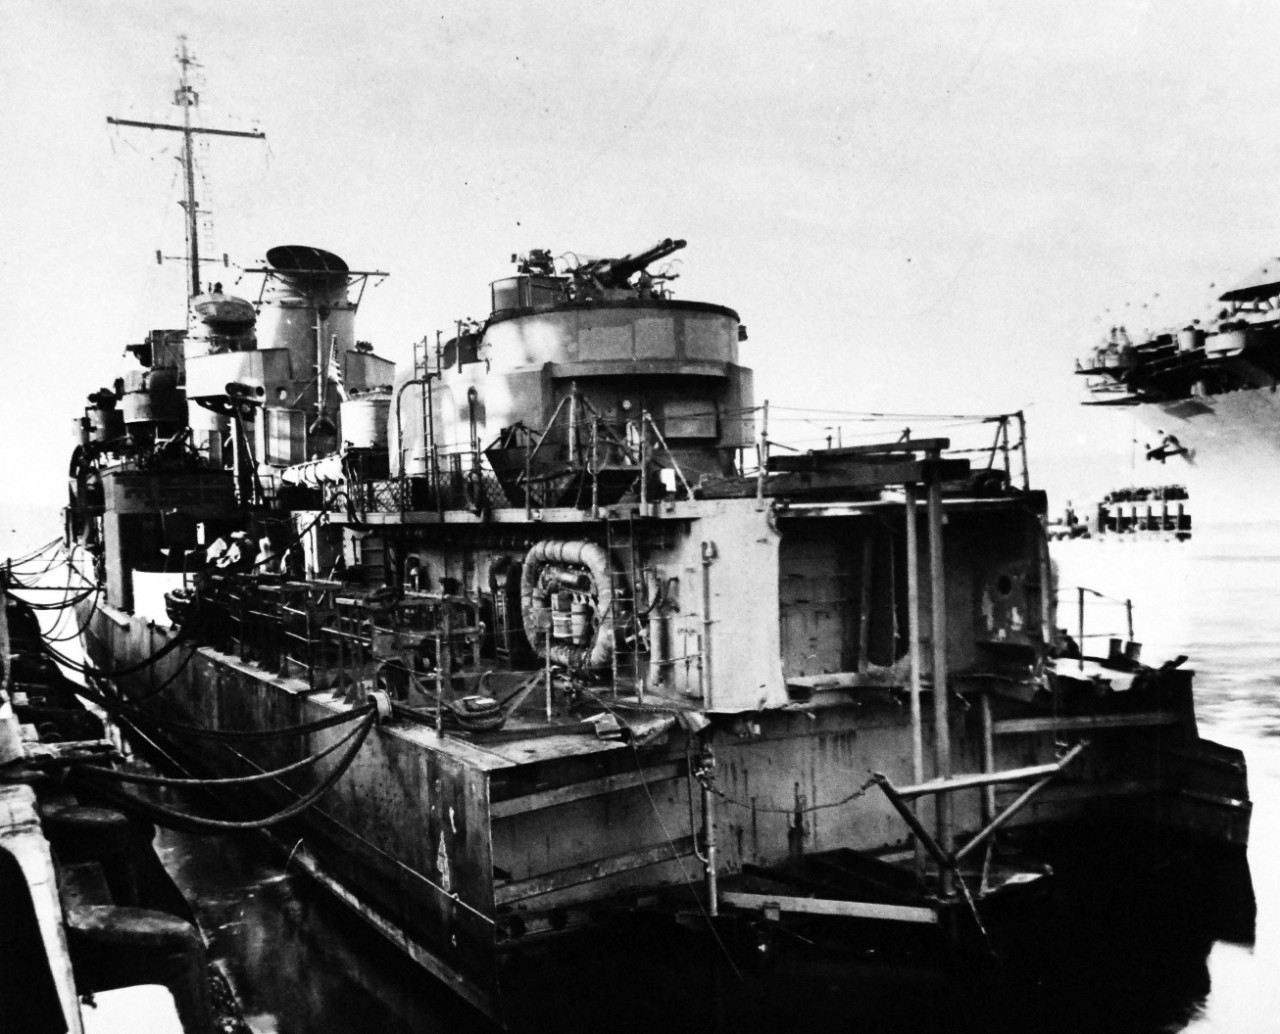 80-G-44451:   Aleutian Island Campaign, June 1942-August 1943.    Mine in Alaskan waters blew stern off USS Abner Read  (DD 526). She was brought to Puget Sound Navy Yard, Bremerton, Washington, for repairs.   Temporary repairs were made in the North, so she could be towed to the Navy Yard. Photograph released 11 January 1944.  Official U.S. Navy Photograph, now in the collections of the National Archives.  (2014/6/5). 